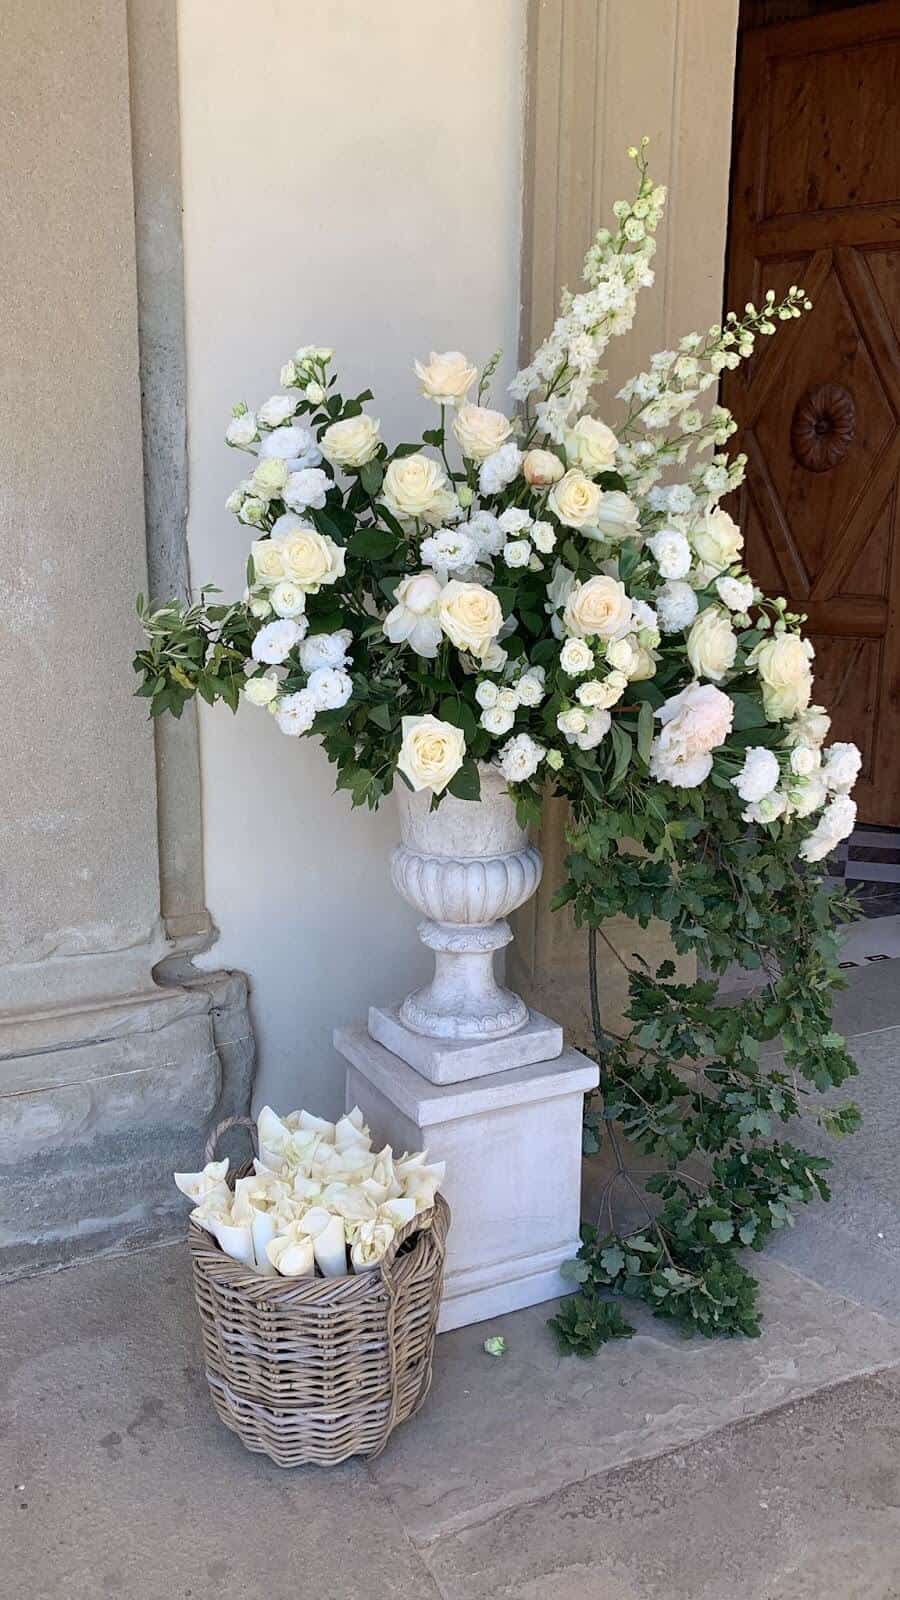 Outside church door with flowers for a Catholic Wedding In Italy